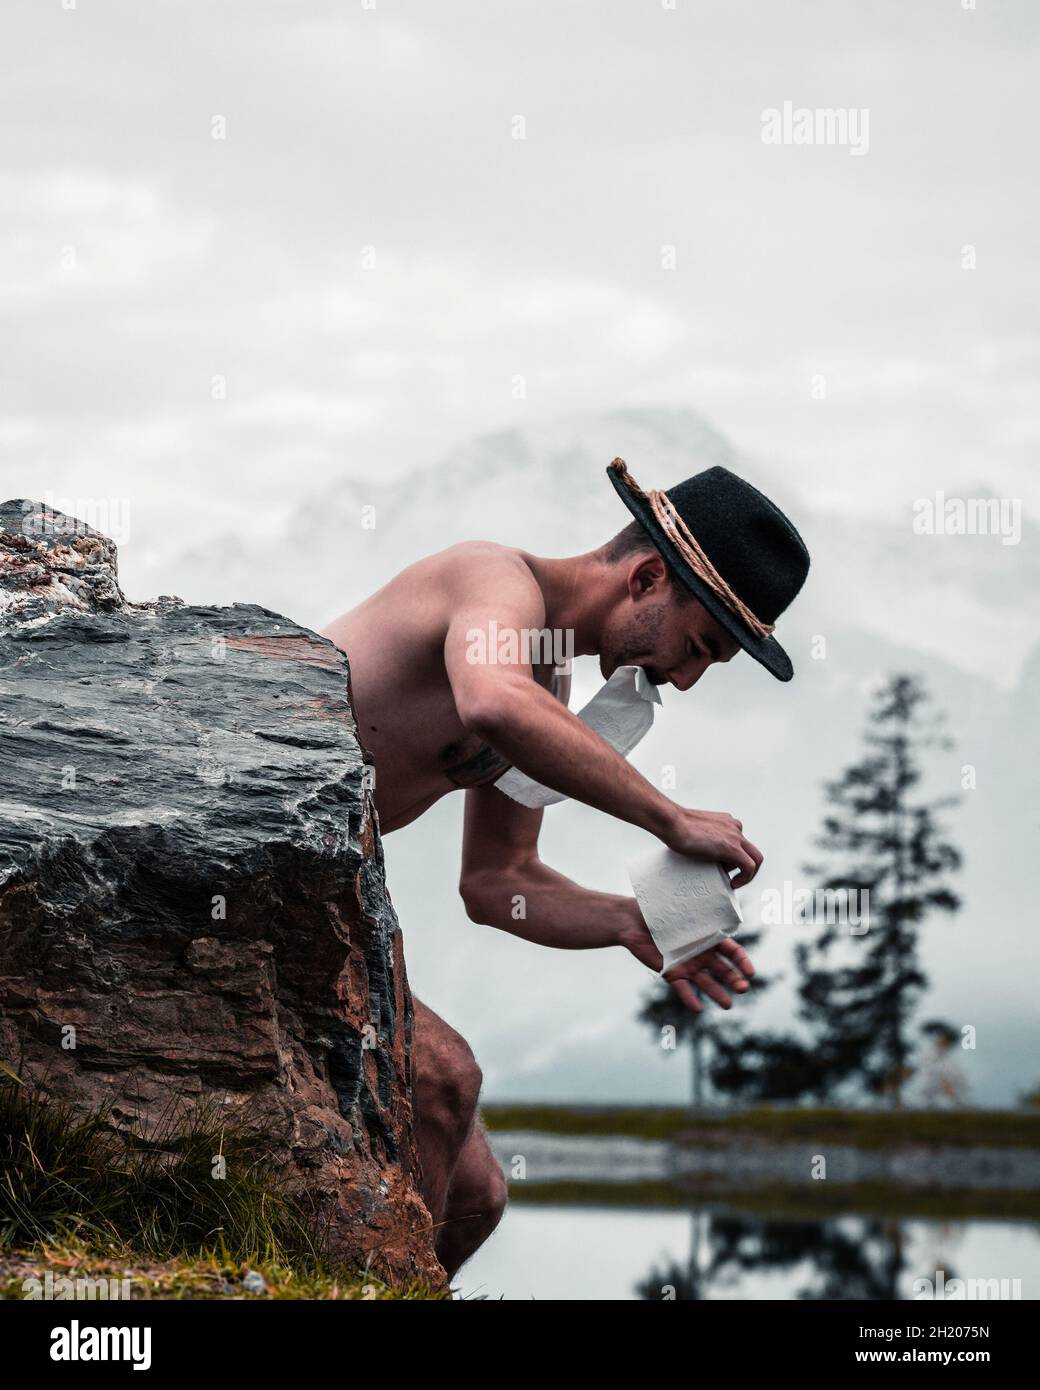 Funny photo of a man doing his business in the nature. Stock Photo